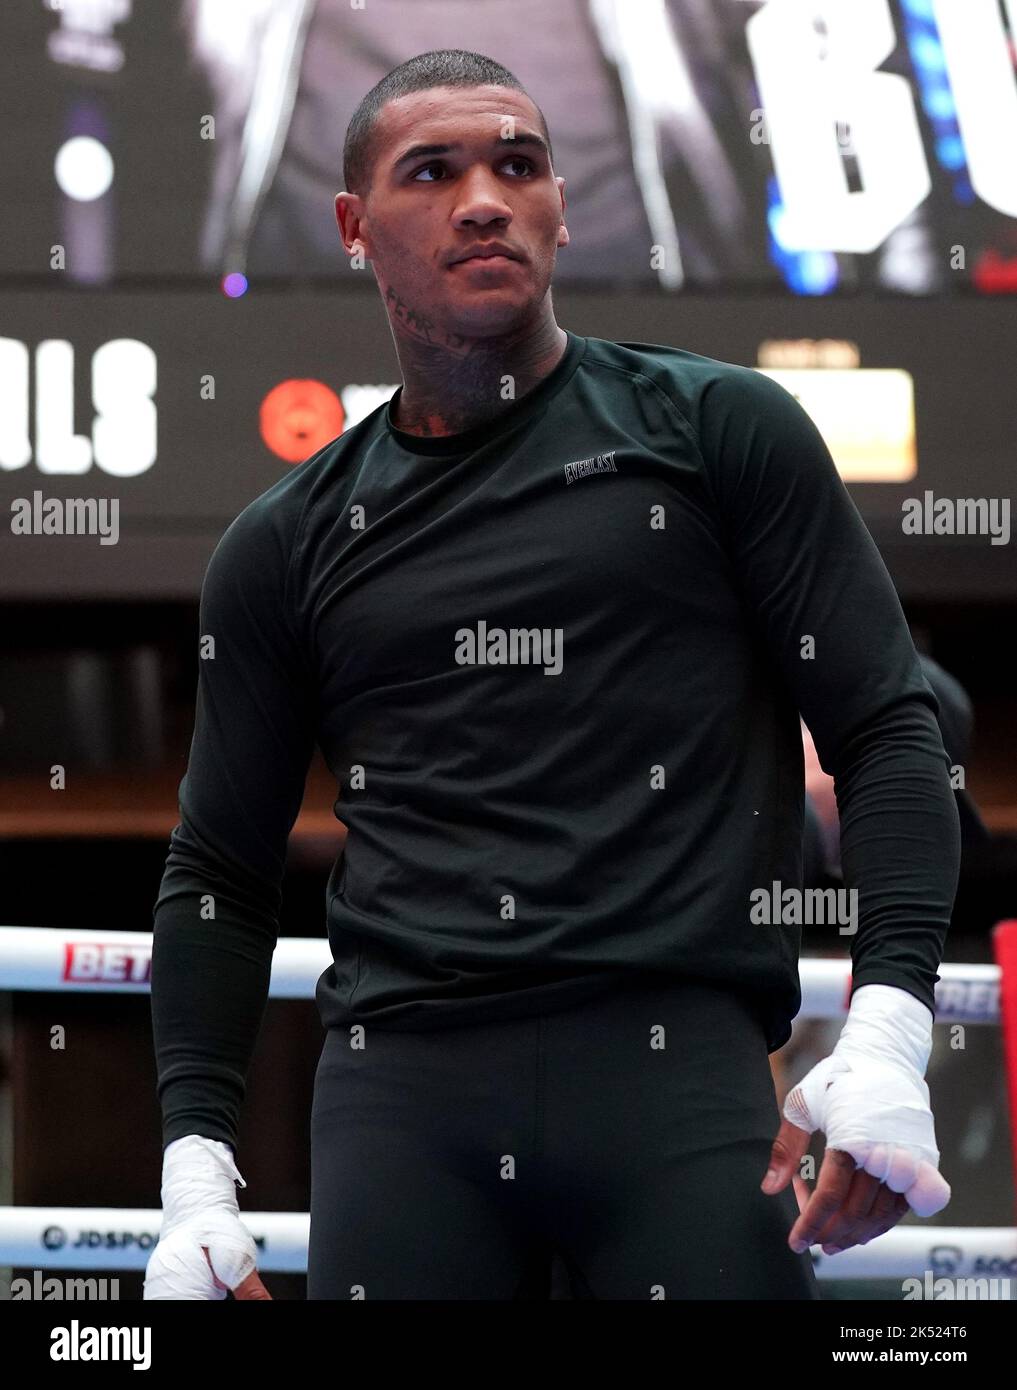 Conor Benn during a media workout at Outernet London. The British Boxing Board of Control has “prohibited” a fight between Conor Benn and Chris Eubank Jr as “it is not in the interests of boxing”, the governing body has announced in a statement. Picture date: Wednesday October 5, 2022. Stock Photo